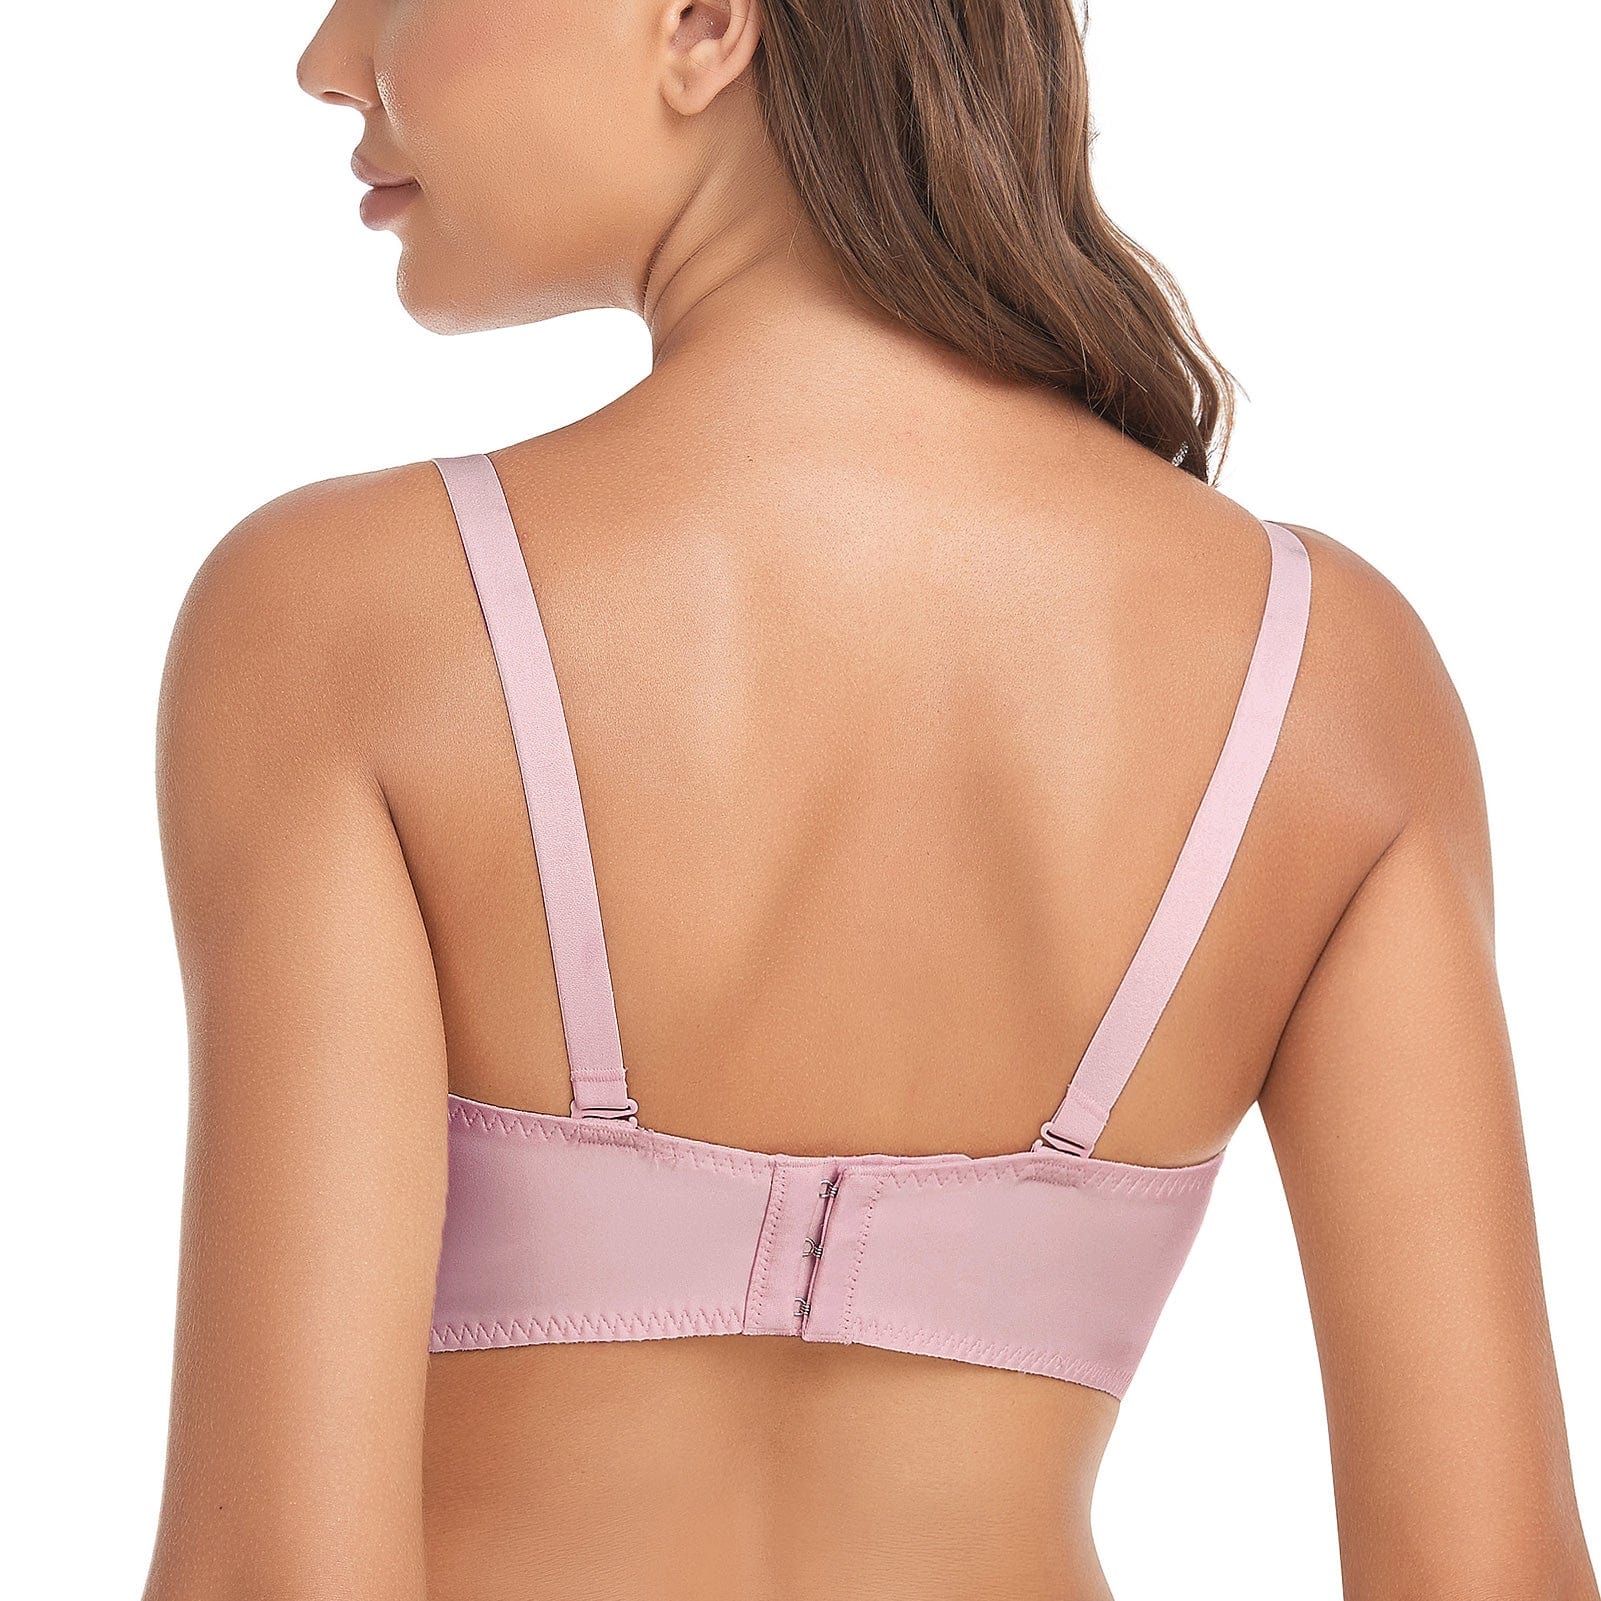 Back of "Add Two Cups" Lace Wirefree Push Up Bra For Women FallSweet